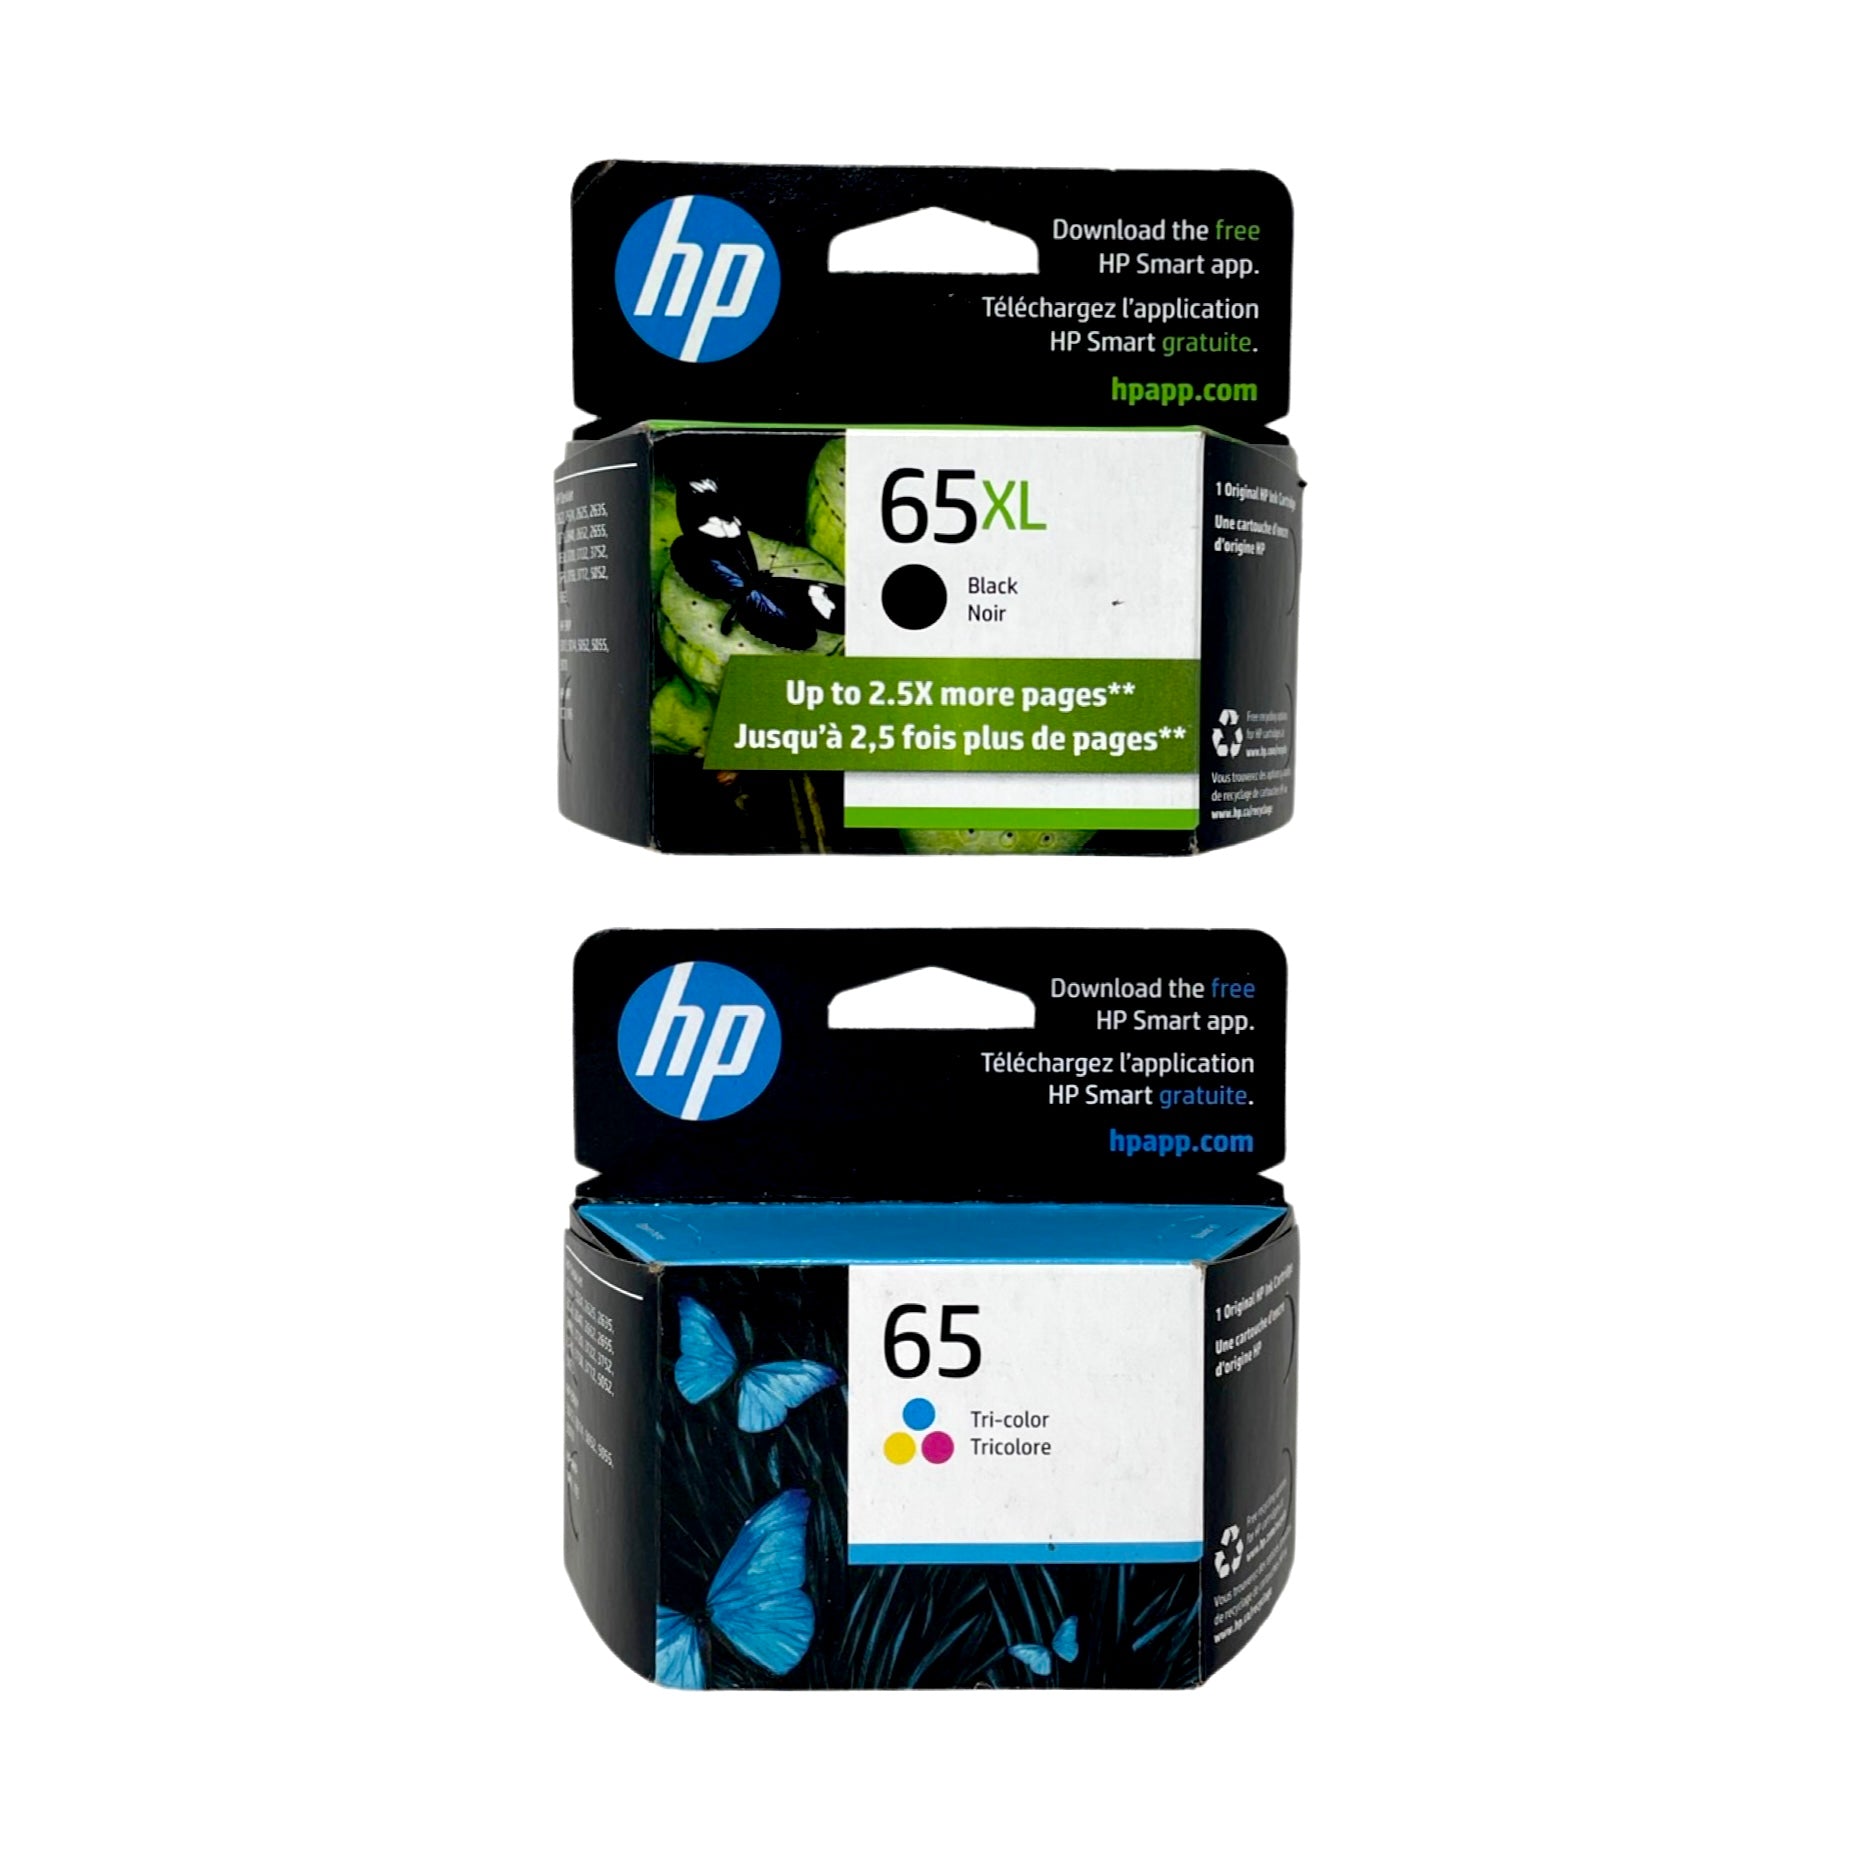 Genuine HP 65XL Black High-Yield and 65 Tri-Color Ink Cartridges Multi-Pack 2-Pack